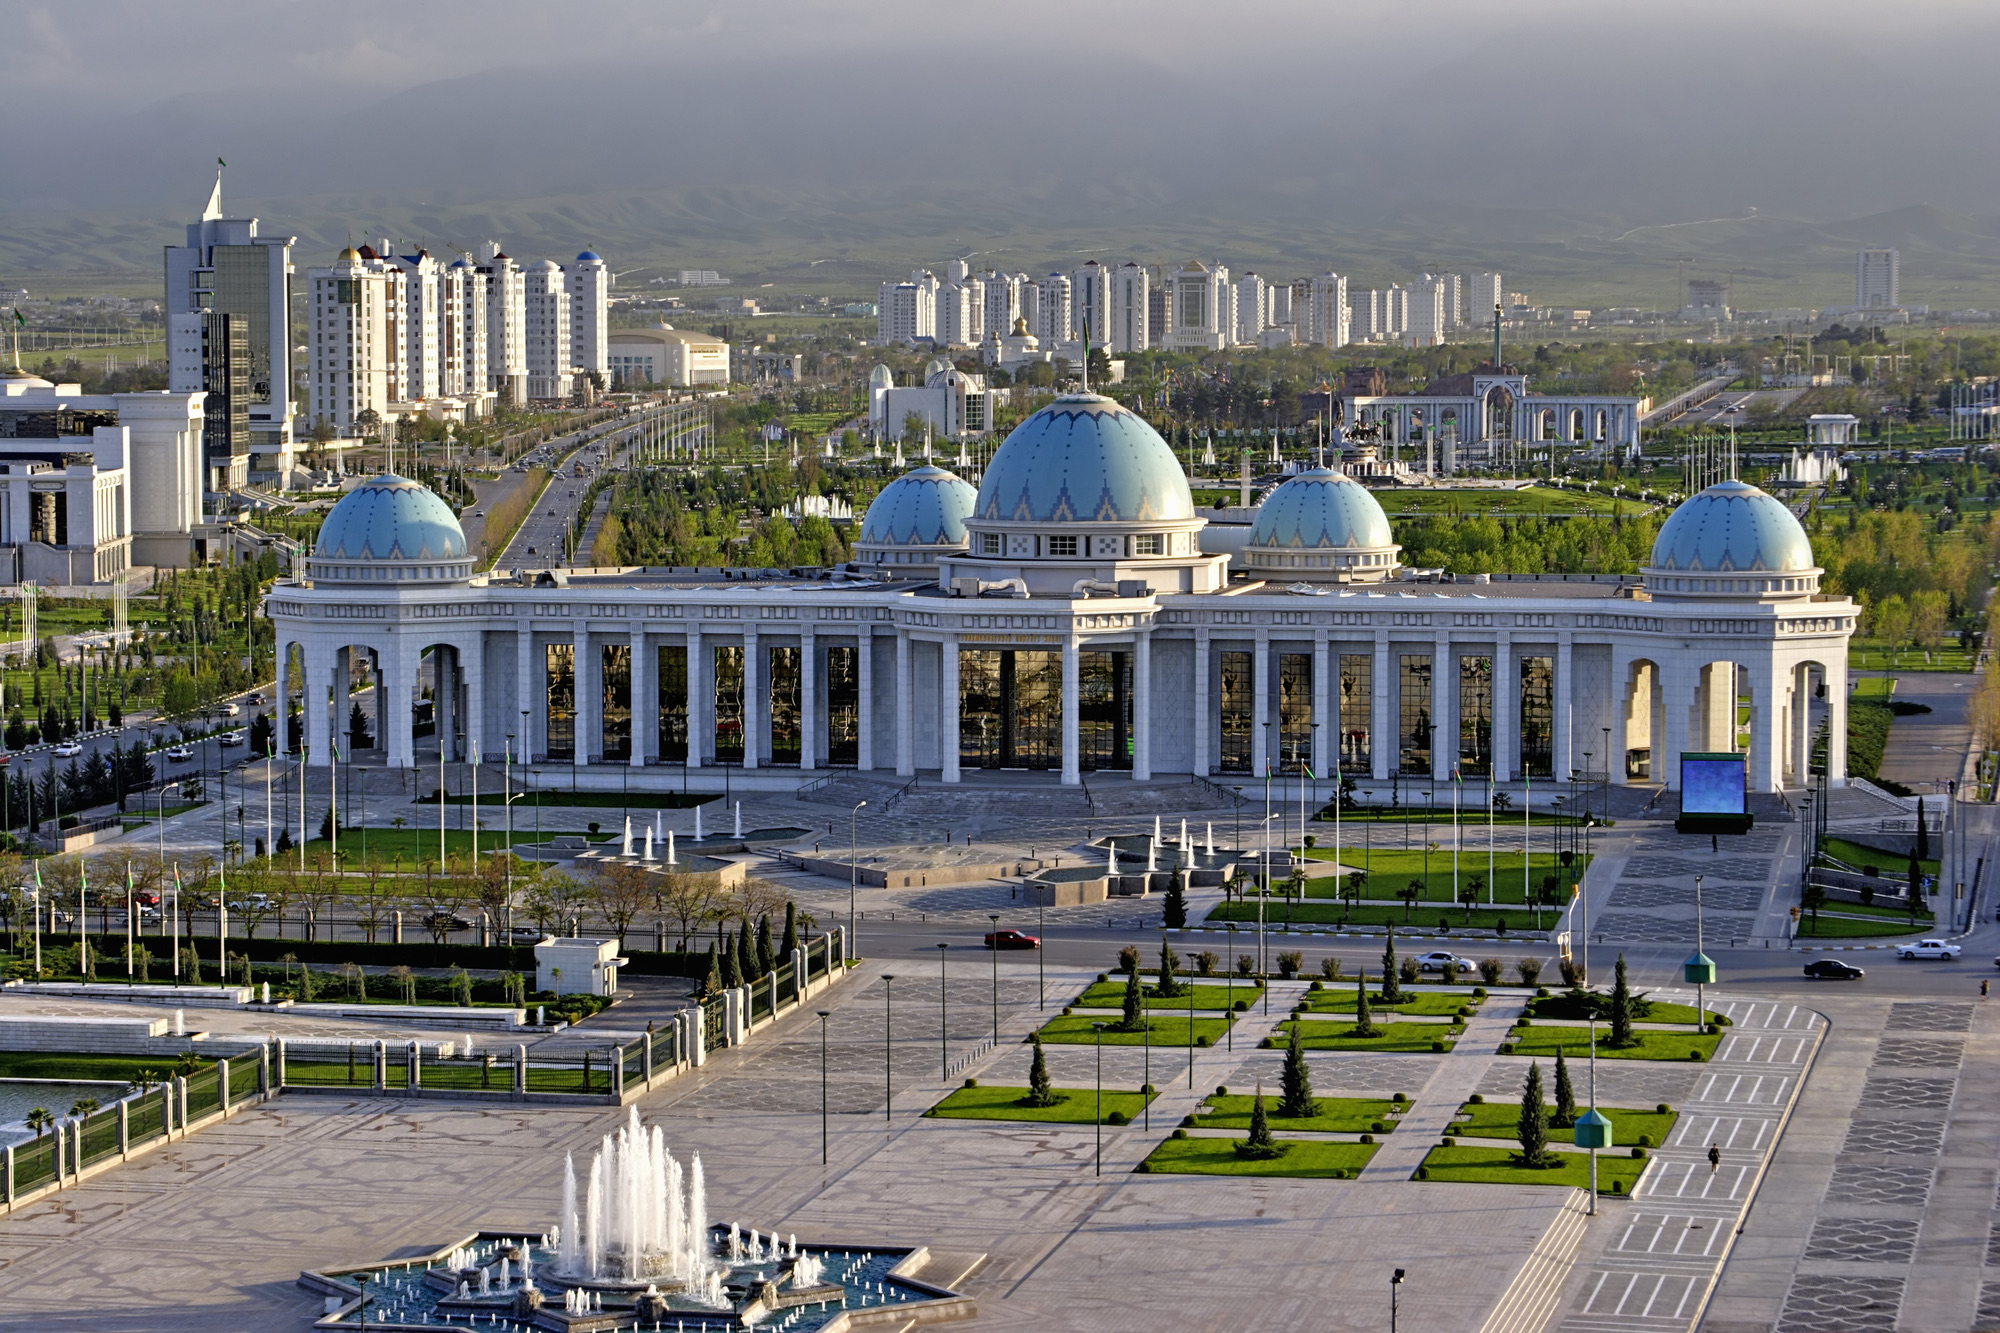 <p>Turkmenistan is one of the least-visited places on the planet owing to its 70% desert area. So, if you are looking for an off-beat experience, Ashgabat (the capital city) has got you covered. It also holds a Guinness record for its rich density of white marble-clad buildings worldwide</p><p>You must visit the modern Wedding Palace, dive into the Kow Ata Underground Lake, and even visit the Turkmen carpet museum for its exquisite carpets.</p><p>For a new experience, plan a trip to Yangykala Canyon to view surreal cliffs and Ancient Merv, a famous UNESCO World Heritage Site.</p>